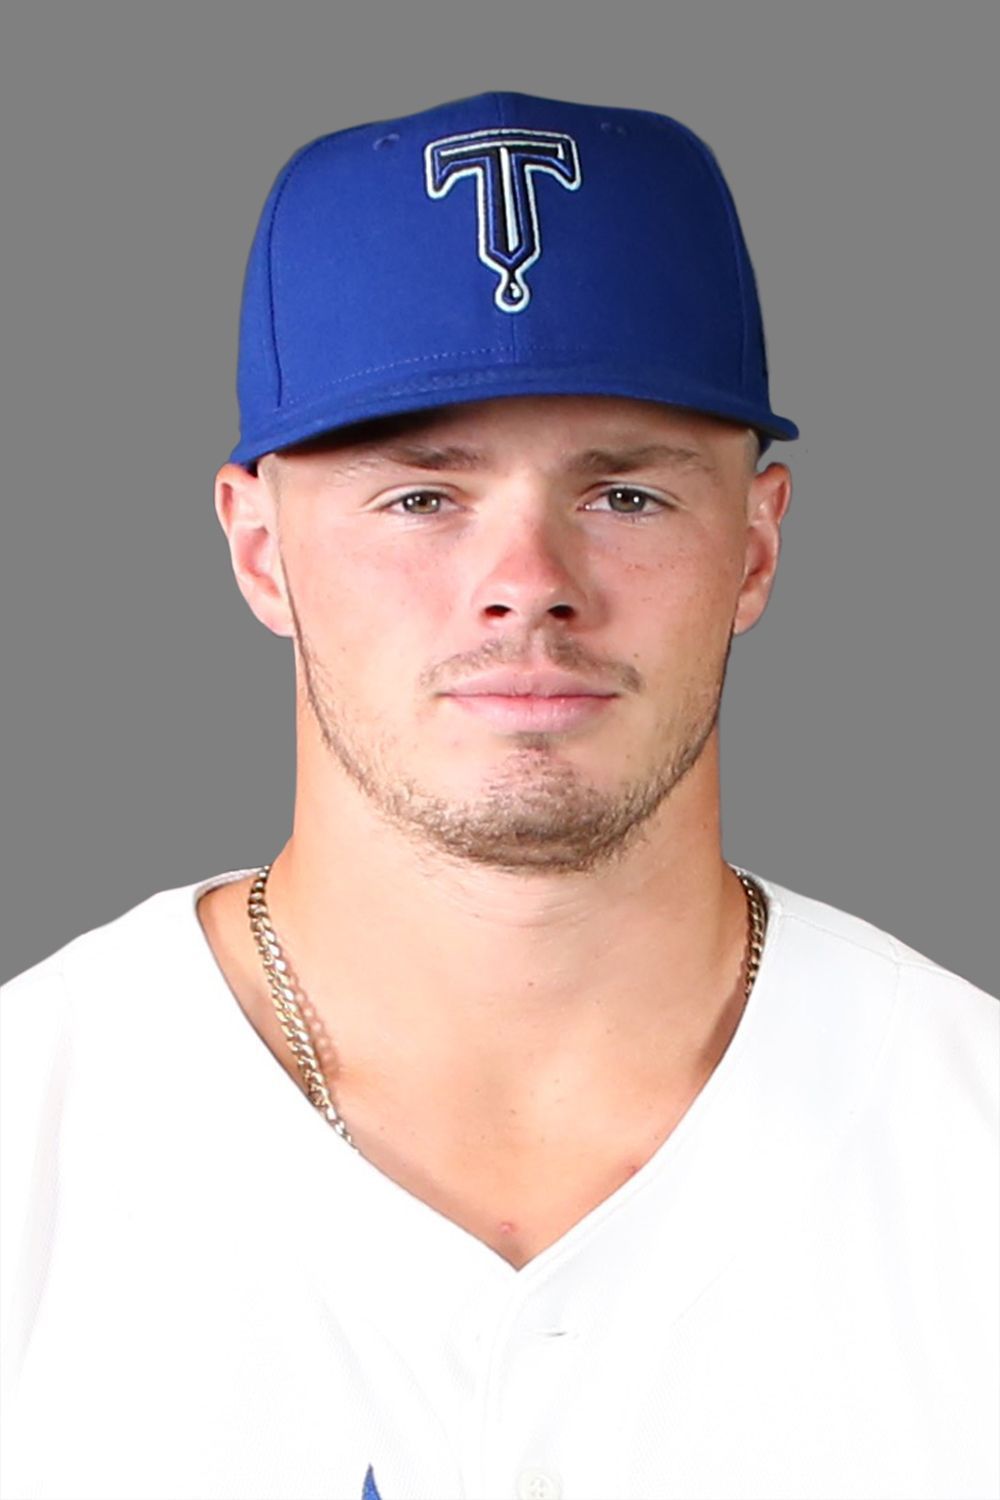 Pro baseball: Dodgers prospect Gavin Lux sparks Drillers to